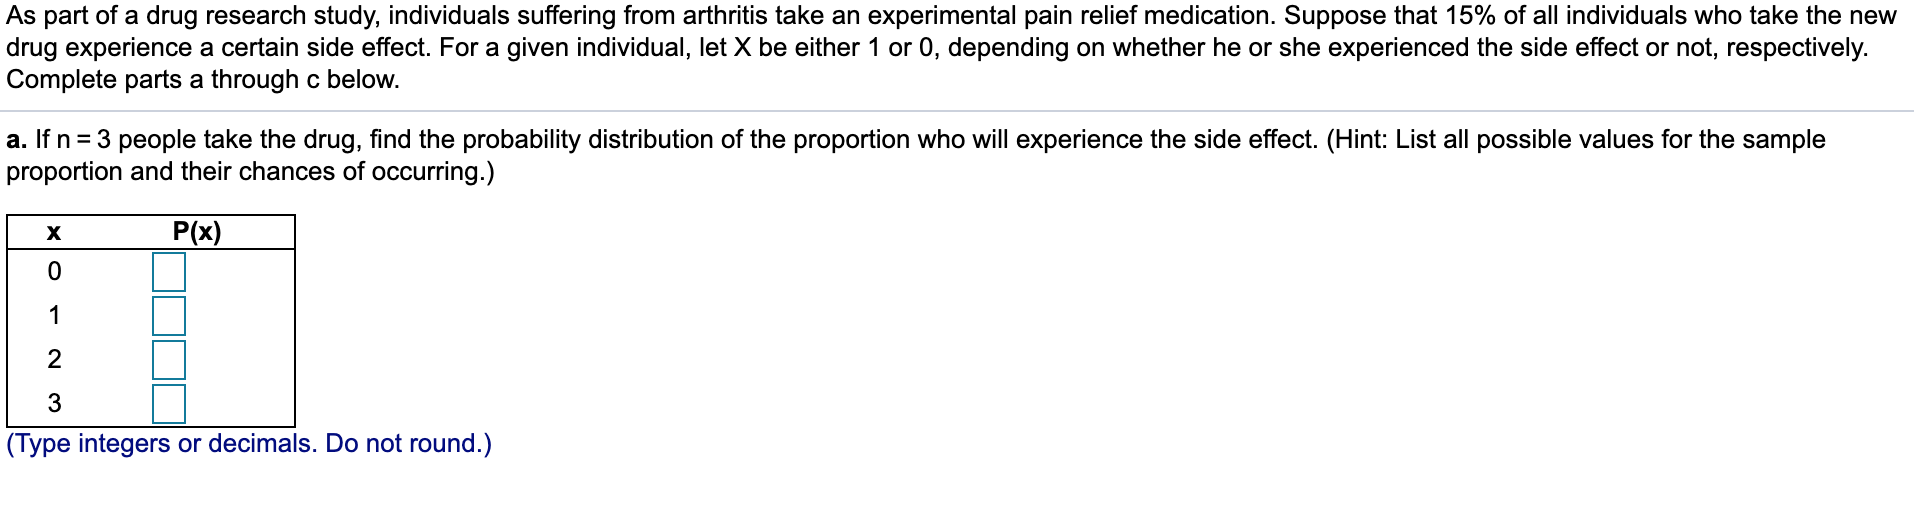 As part of a drug research study, individuals suffering from arthritis take an experimental pain relief medication. Suppose that 15% of all individuals who take the new
drug experience a certain side effect. For a given individual, let X be either 1 or 0, depending on whether he or she experienced the side effect or not, respectively.
Complete parts a through c below.
a. If n= 3 people take the drug, find the probability distribution of the proportion who will experience the side effect. (Hint: List all possible values for the sample
proportion and their chances of occurring.)
P(x)
х
3
(Type integers or decimals. Do not round.)
